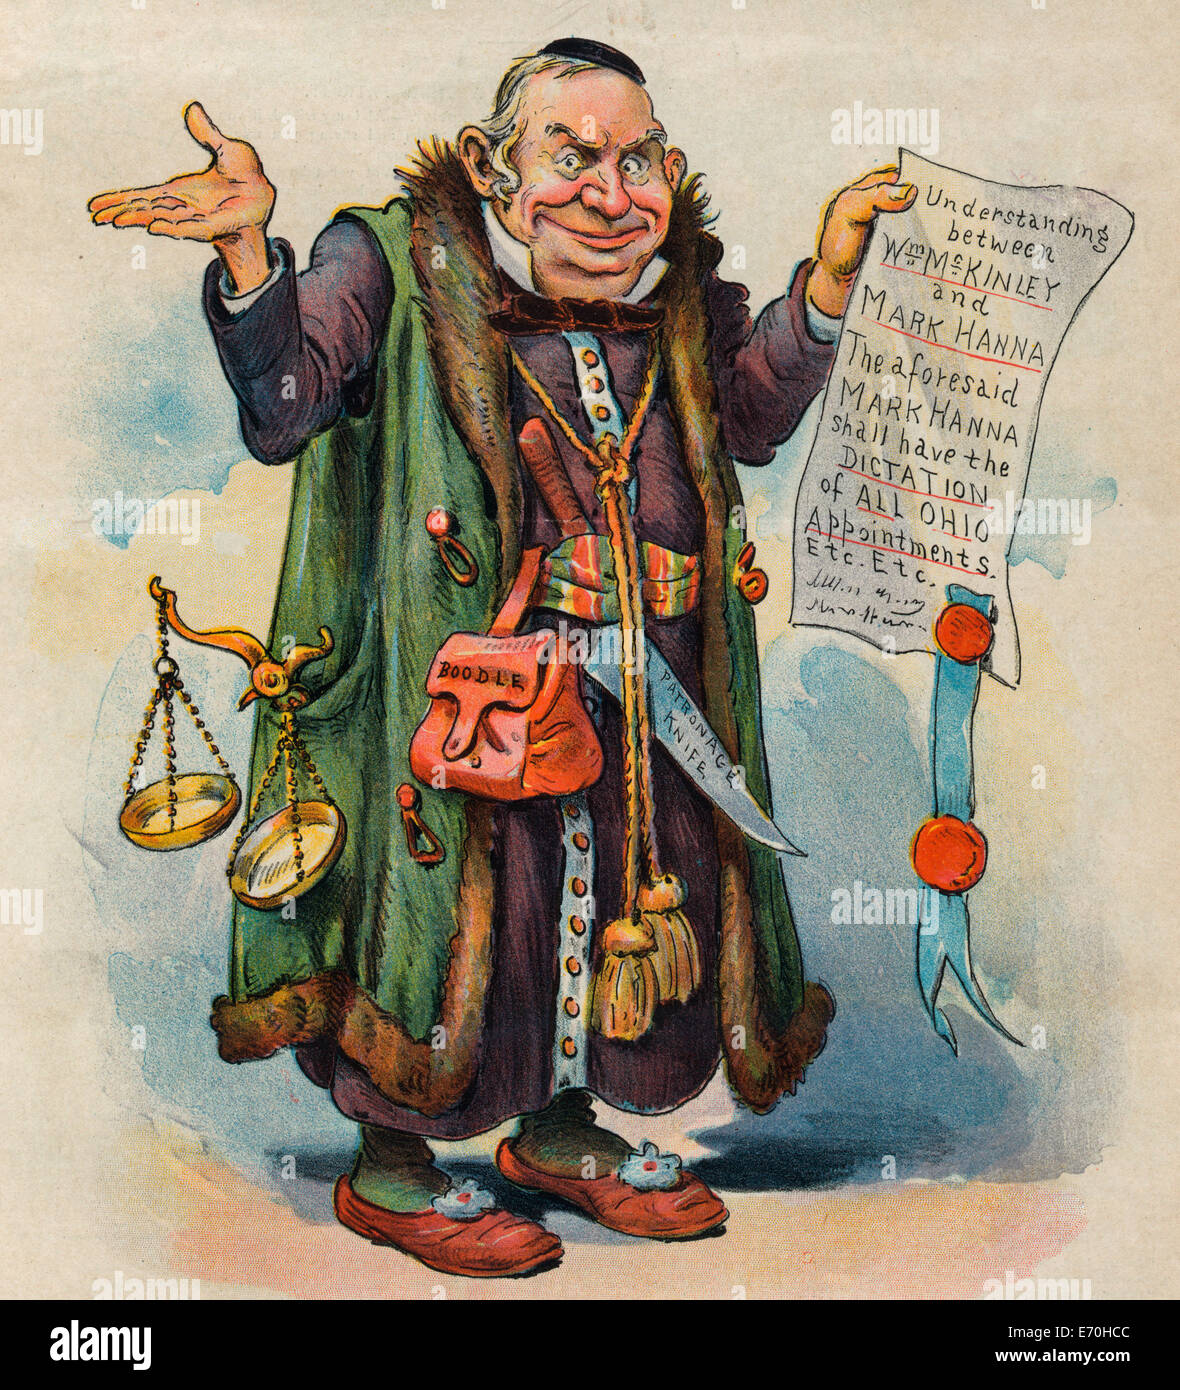 Shylock Hanna - he is Bound to have his pound of flesh.  Marcus A. Hanna as Shylock, wearing a robe, holding a paper that states 'Understanding between Wm. McKinley and Mark Hanna. The aforesaid Mark Hanna shall have the Dictation of all Ohio Appointments, etc., etc.'; hanging from his waist is a purse labeled 'Boodle' and a knife labeled 'Patronage Knife', and extending from his pocket are balance scales.  Political cartoon 1897 Stock Photo